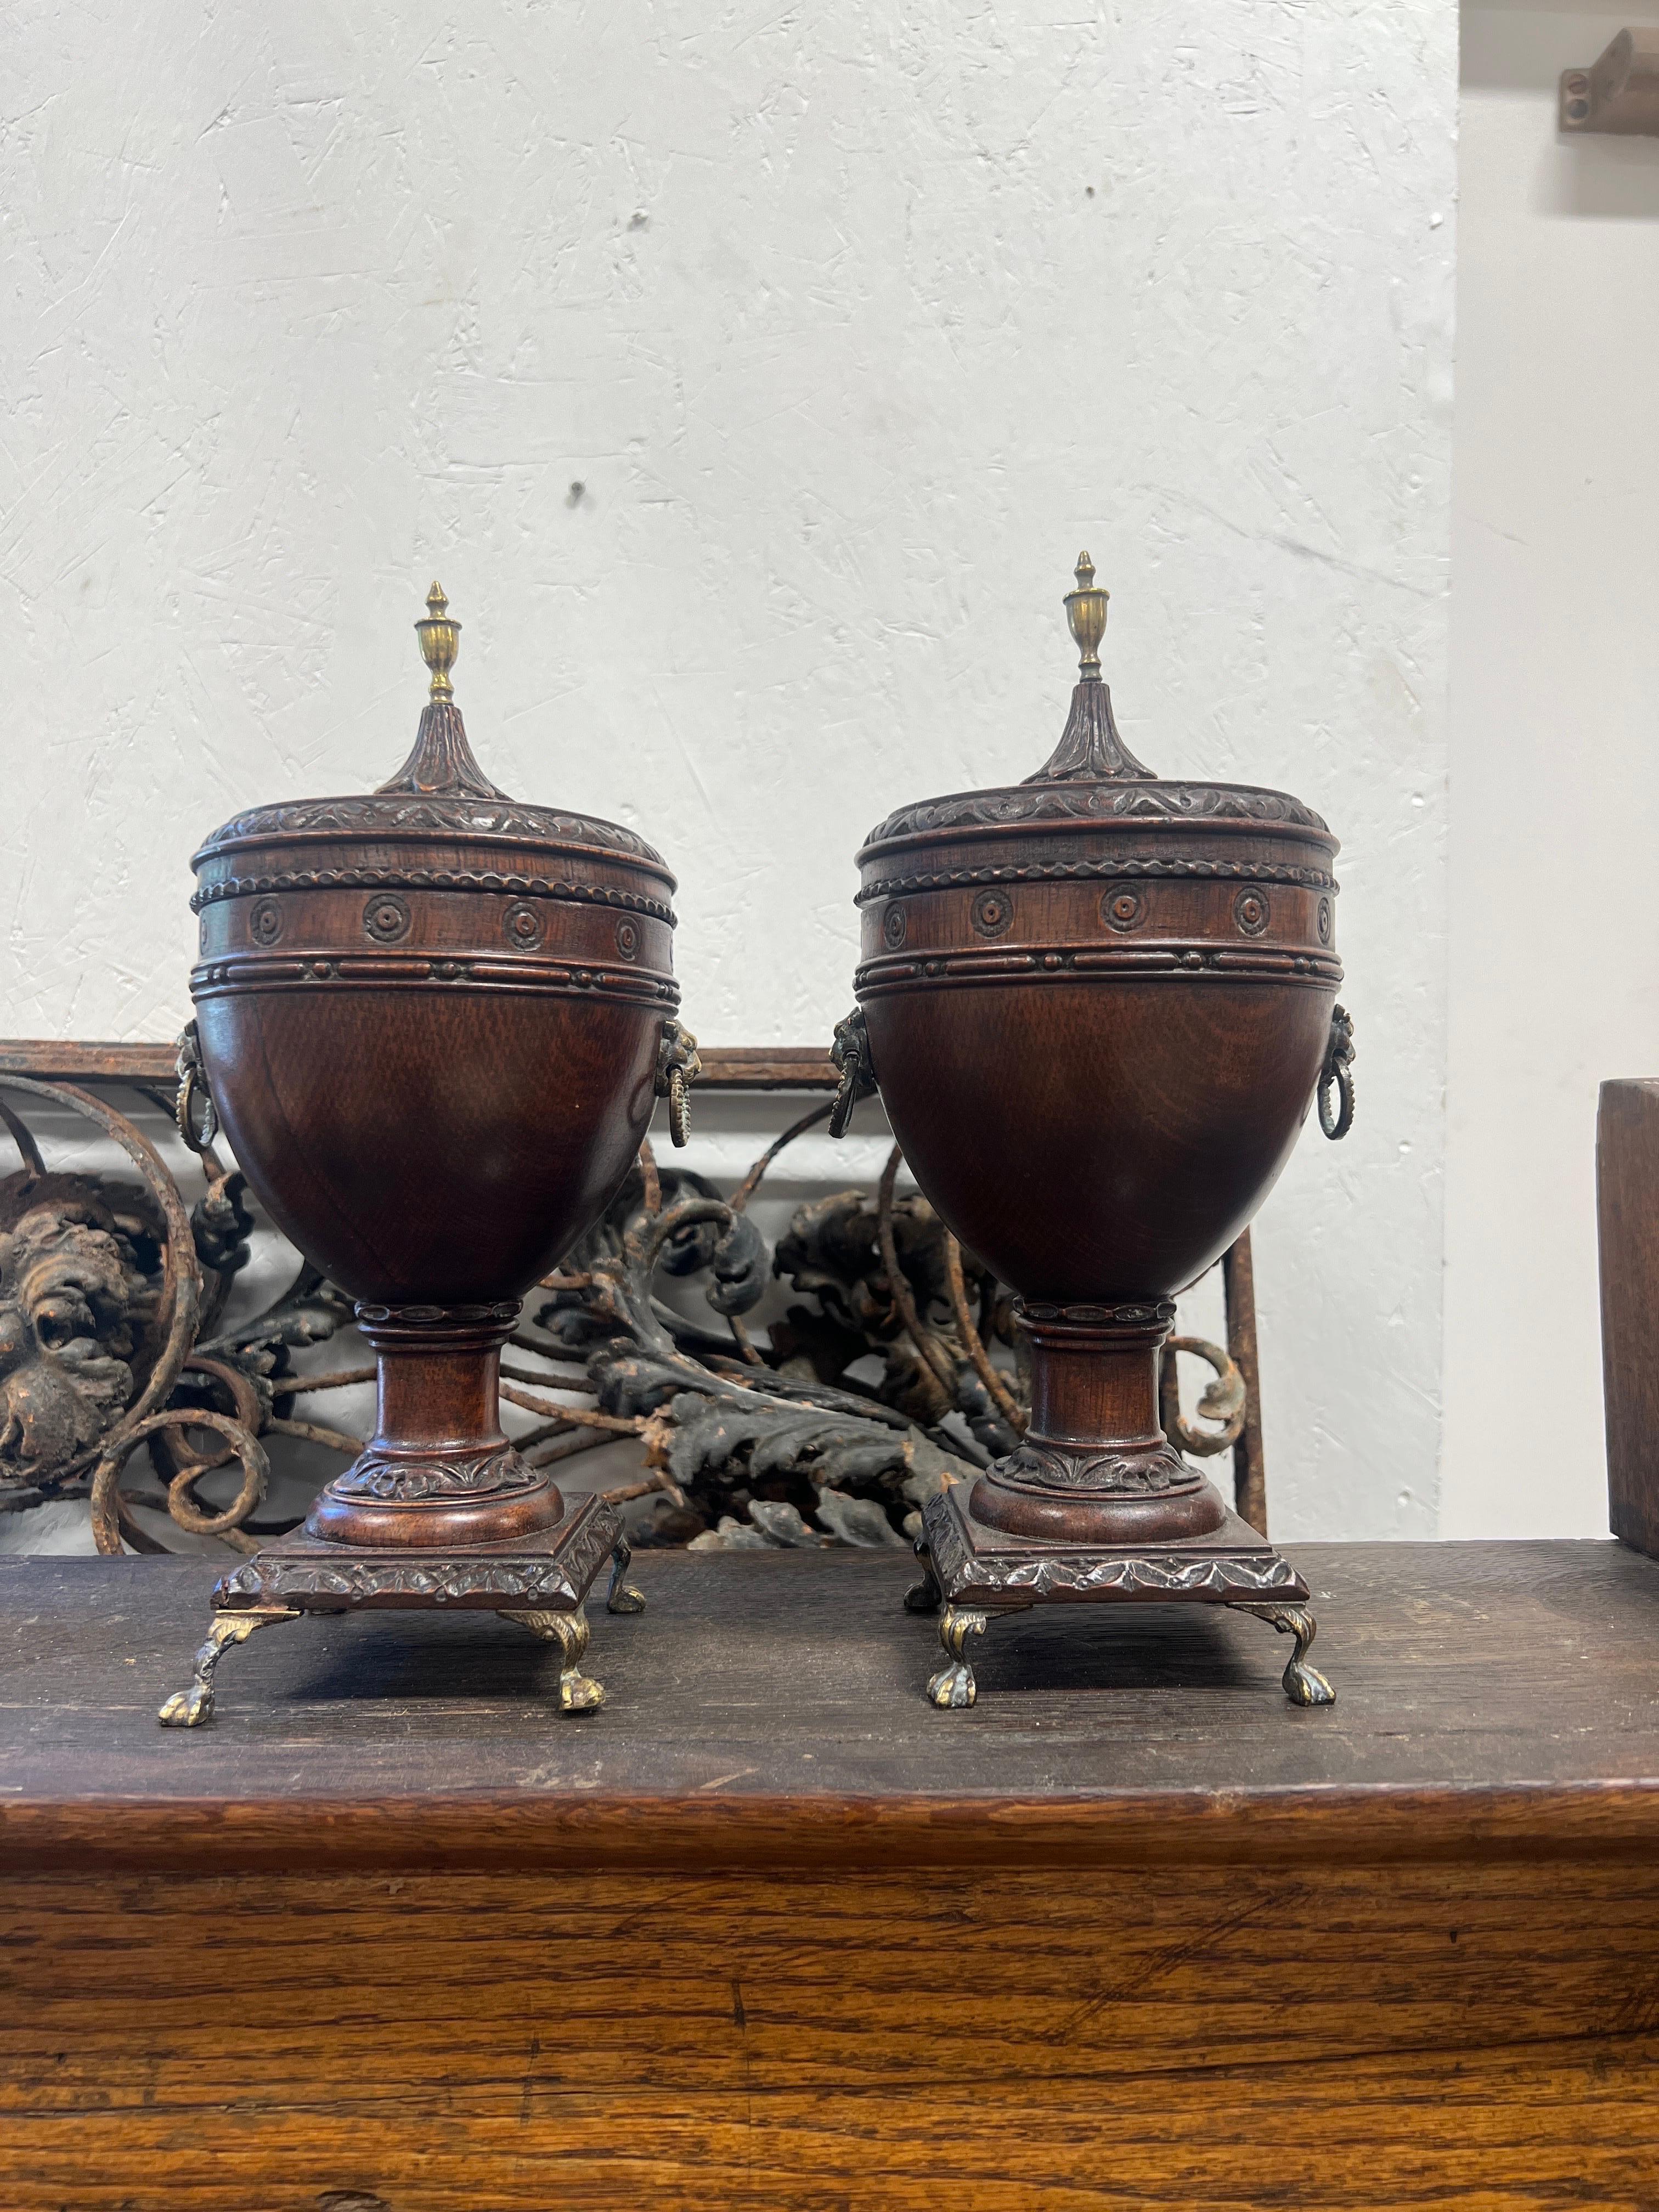 English, early to mid 19th century.

A fantastic pair of Regency urns. Each having a oak body with foliate carved leaf trim to borders, bullseye border to neck and good quality brass lion mount pulls, paw feet and federal style finial mount.